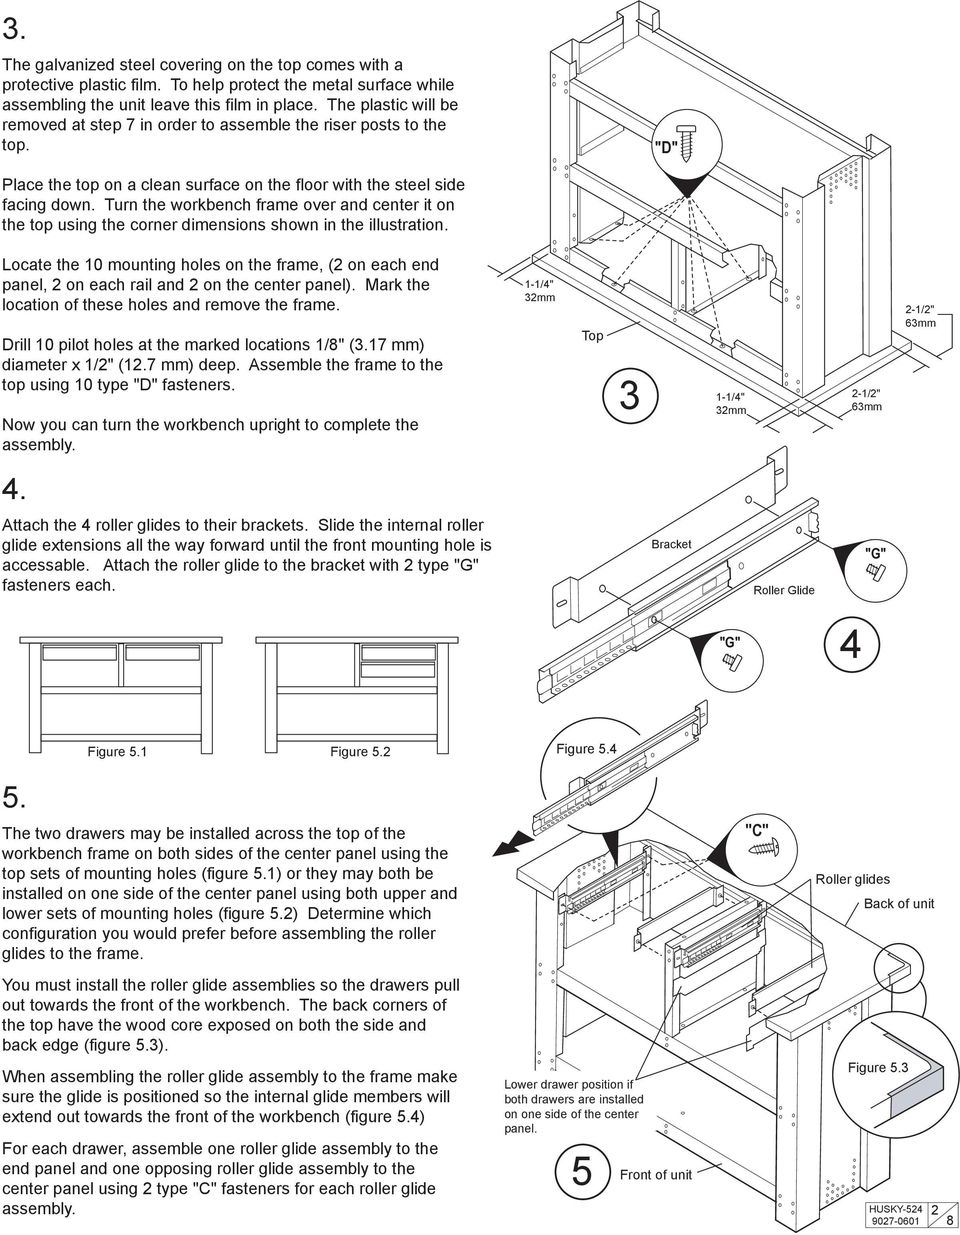 Turn the workbench frame over and center it on the top using the corner dimensions shown in the illustration.